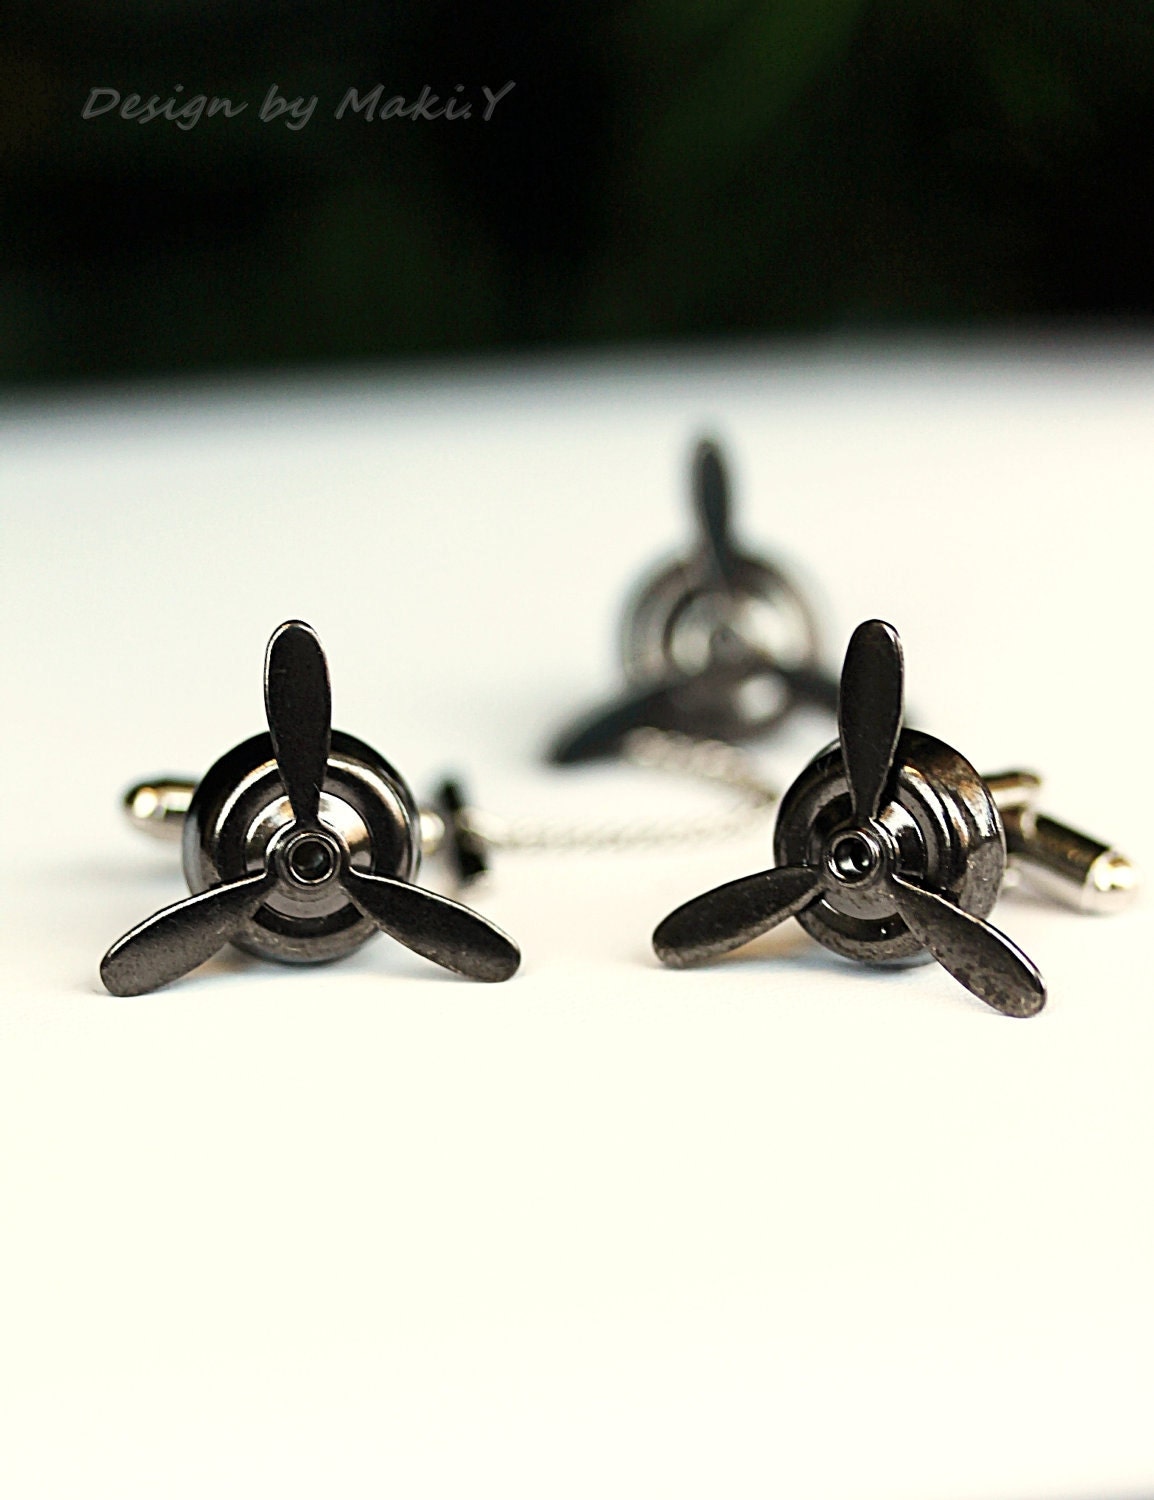 Airplane PROPELLER Cuff Links-Aviator,Black,Gunmetal,wedding,groom gift,brothers,father's day,Steampunk